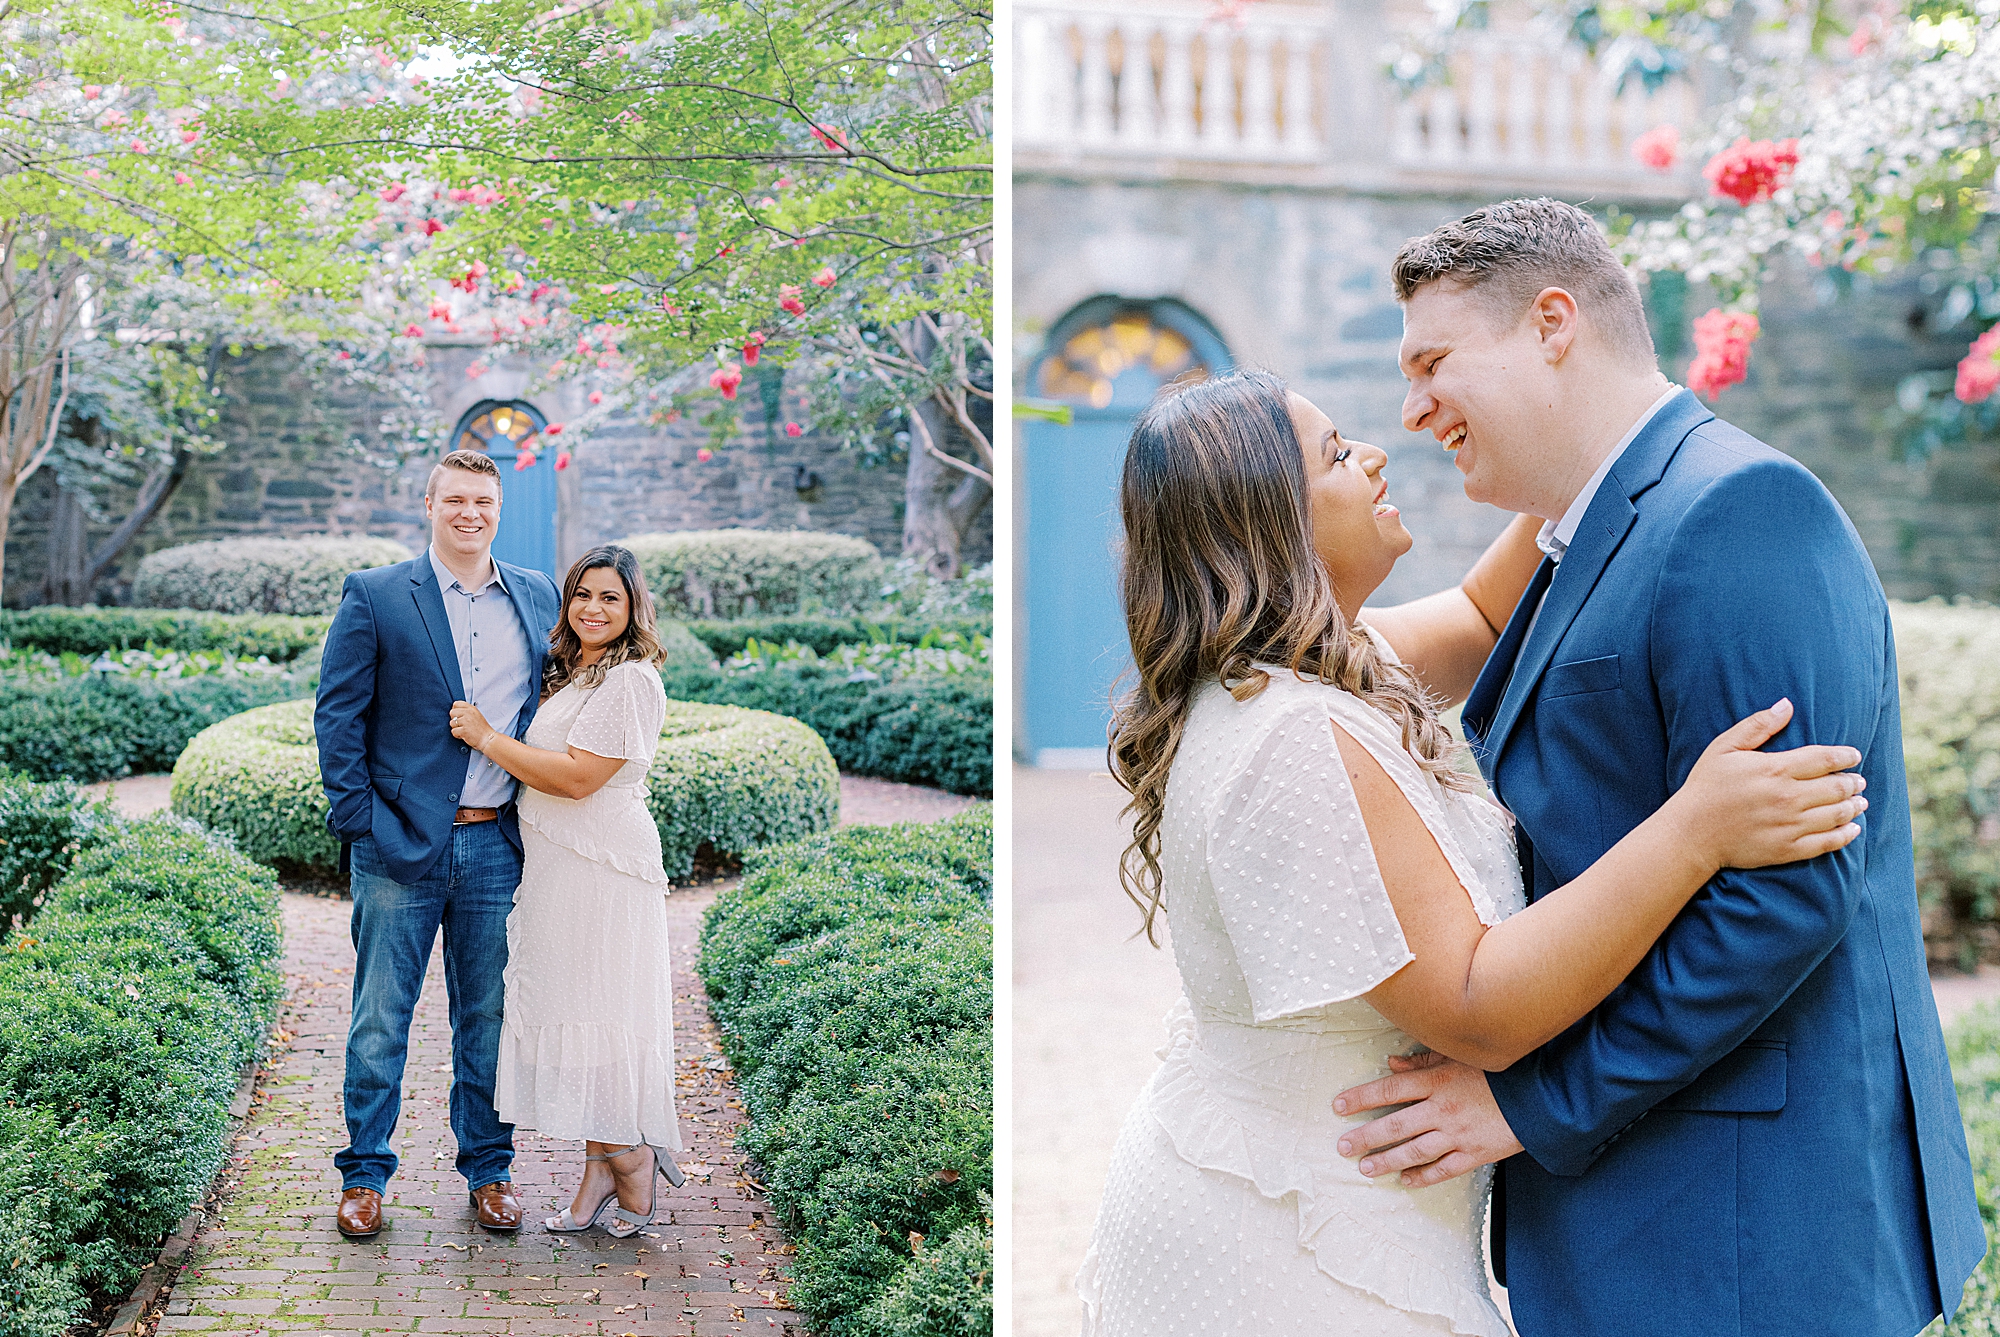 Engagement photos at Carlyle House.